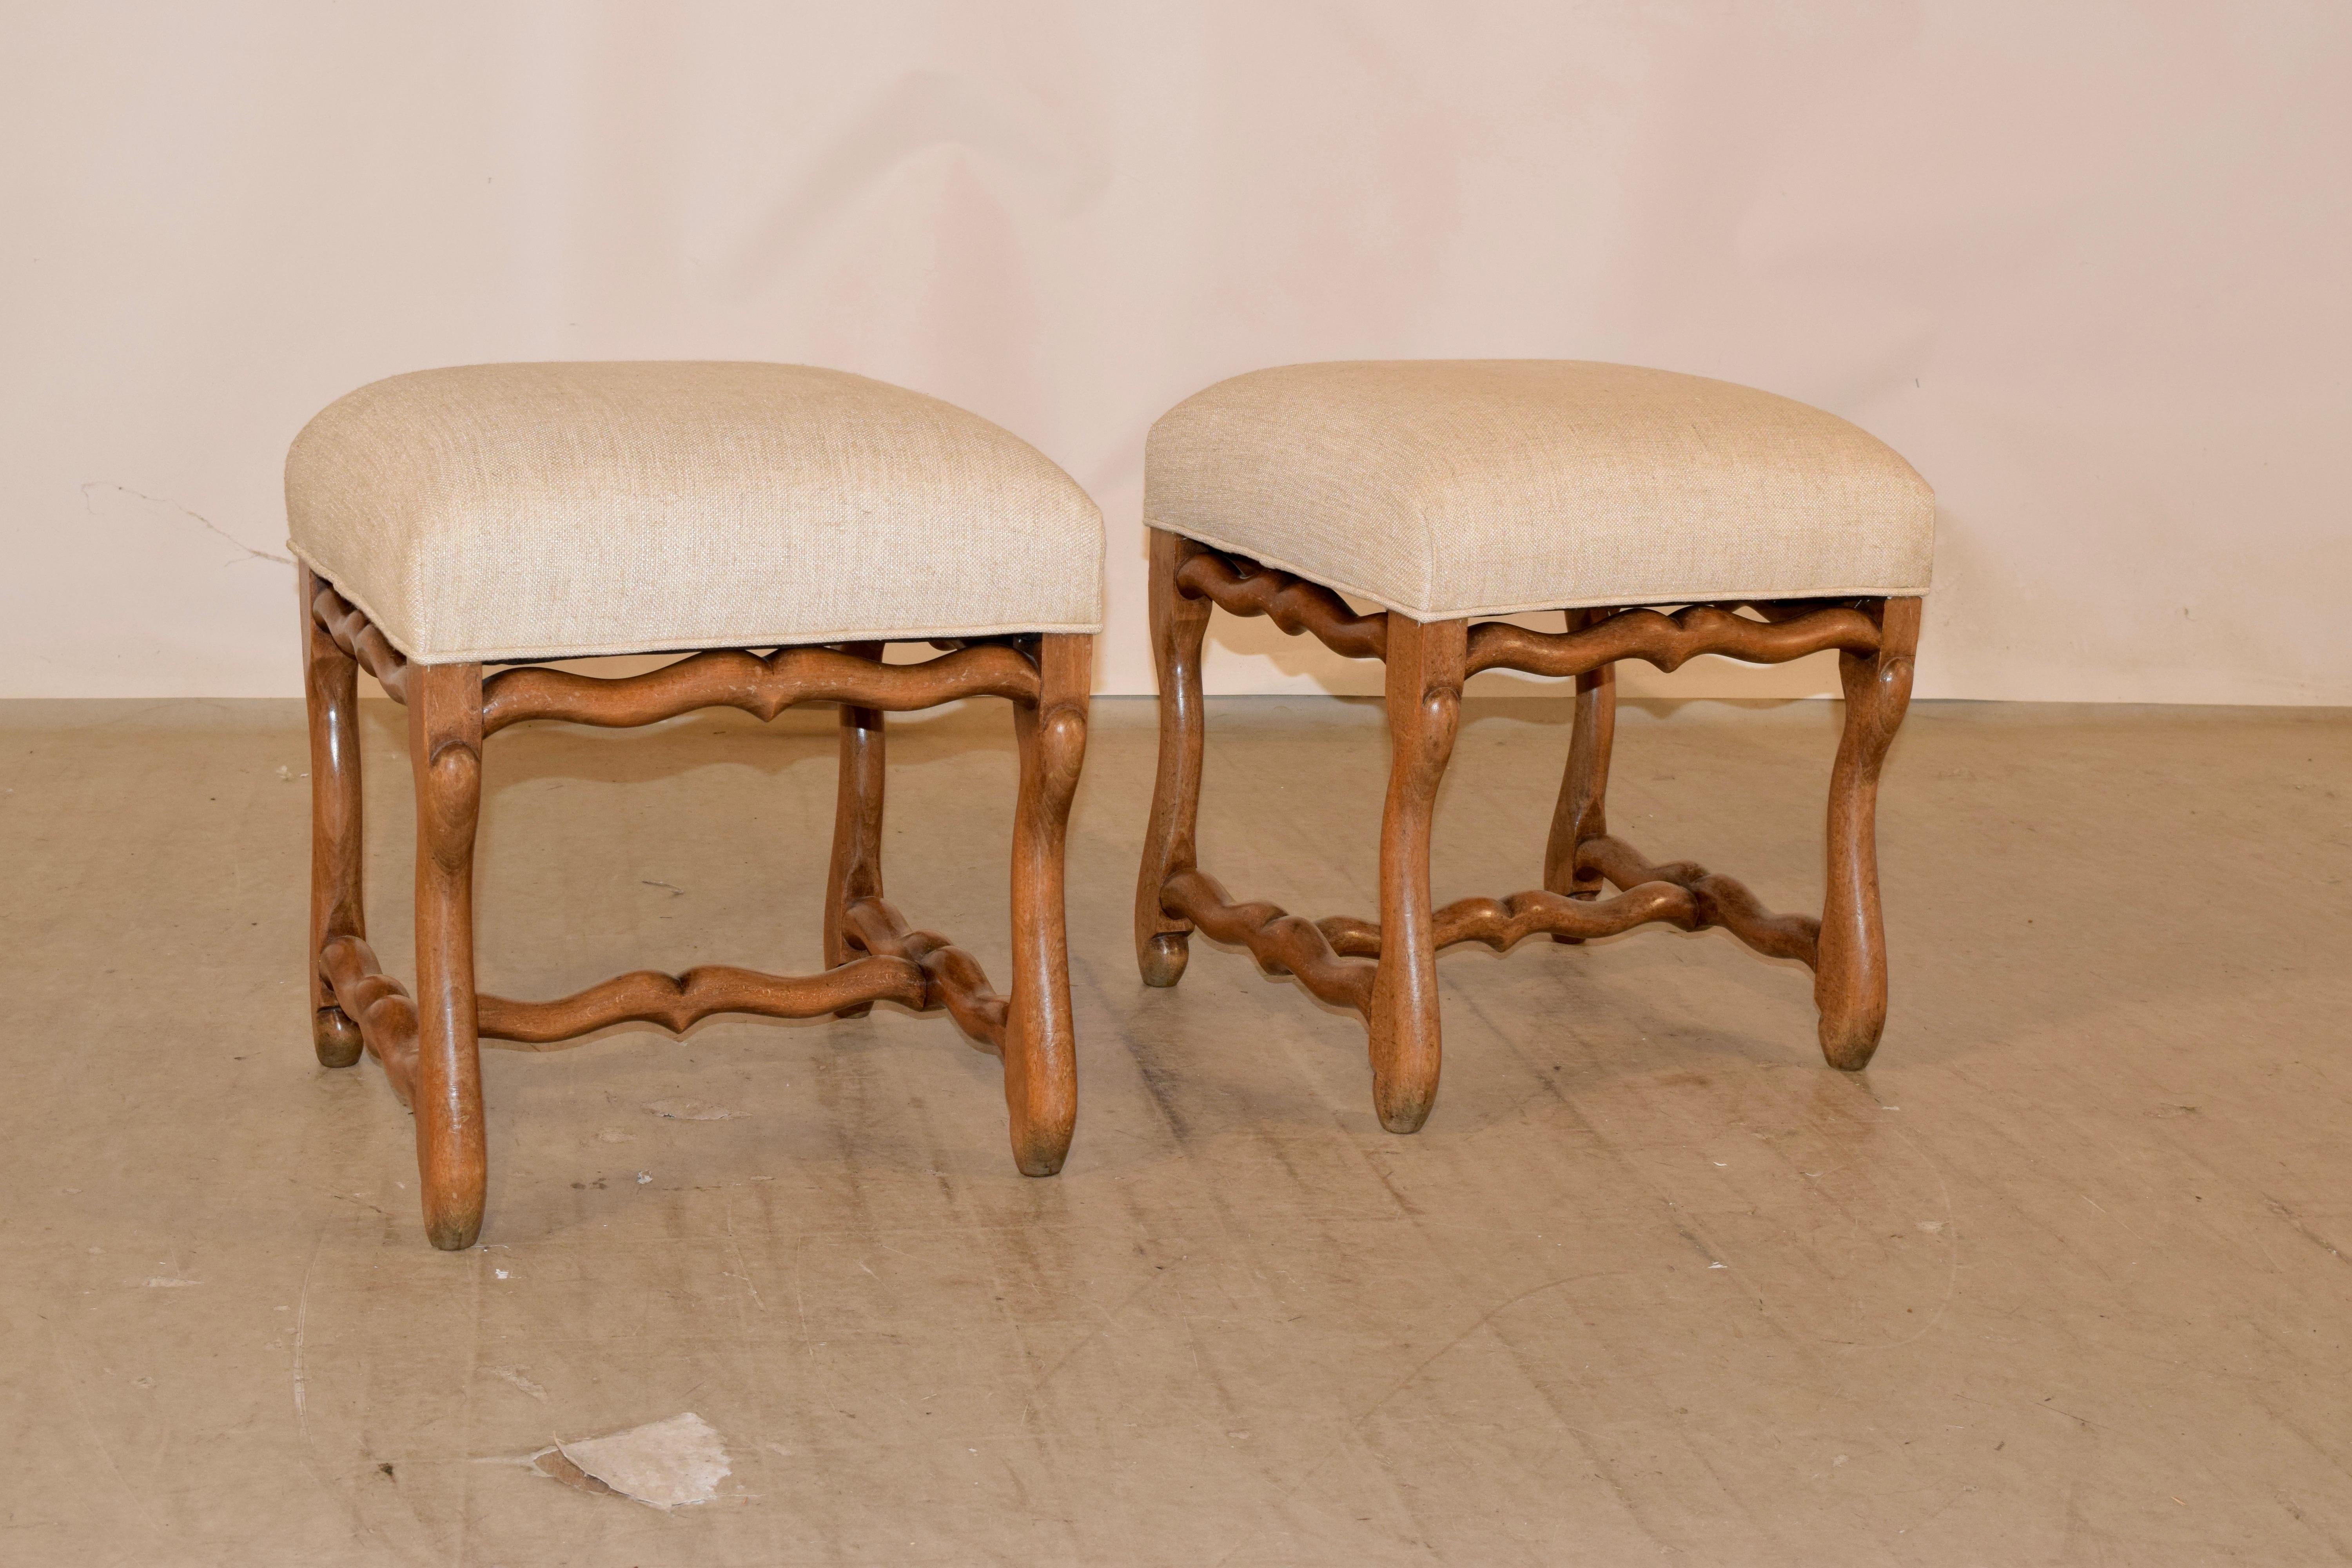 19th century pair of oak mutton leg stools from France. The seats have been newly upholstered in linen and are supported on hand carved oak frames with mutton legs and serpentine shaped stretchers.